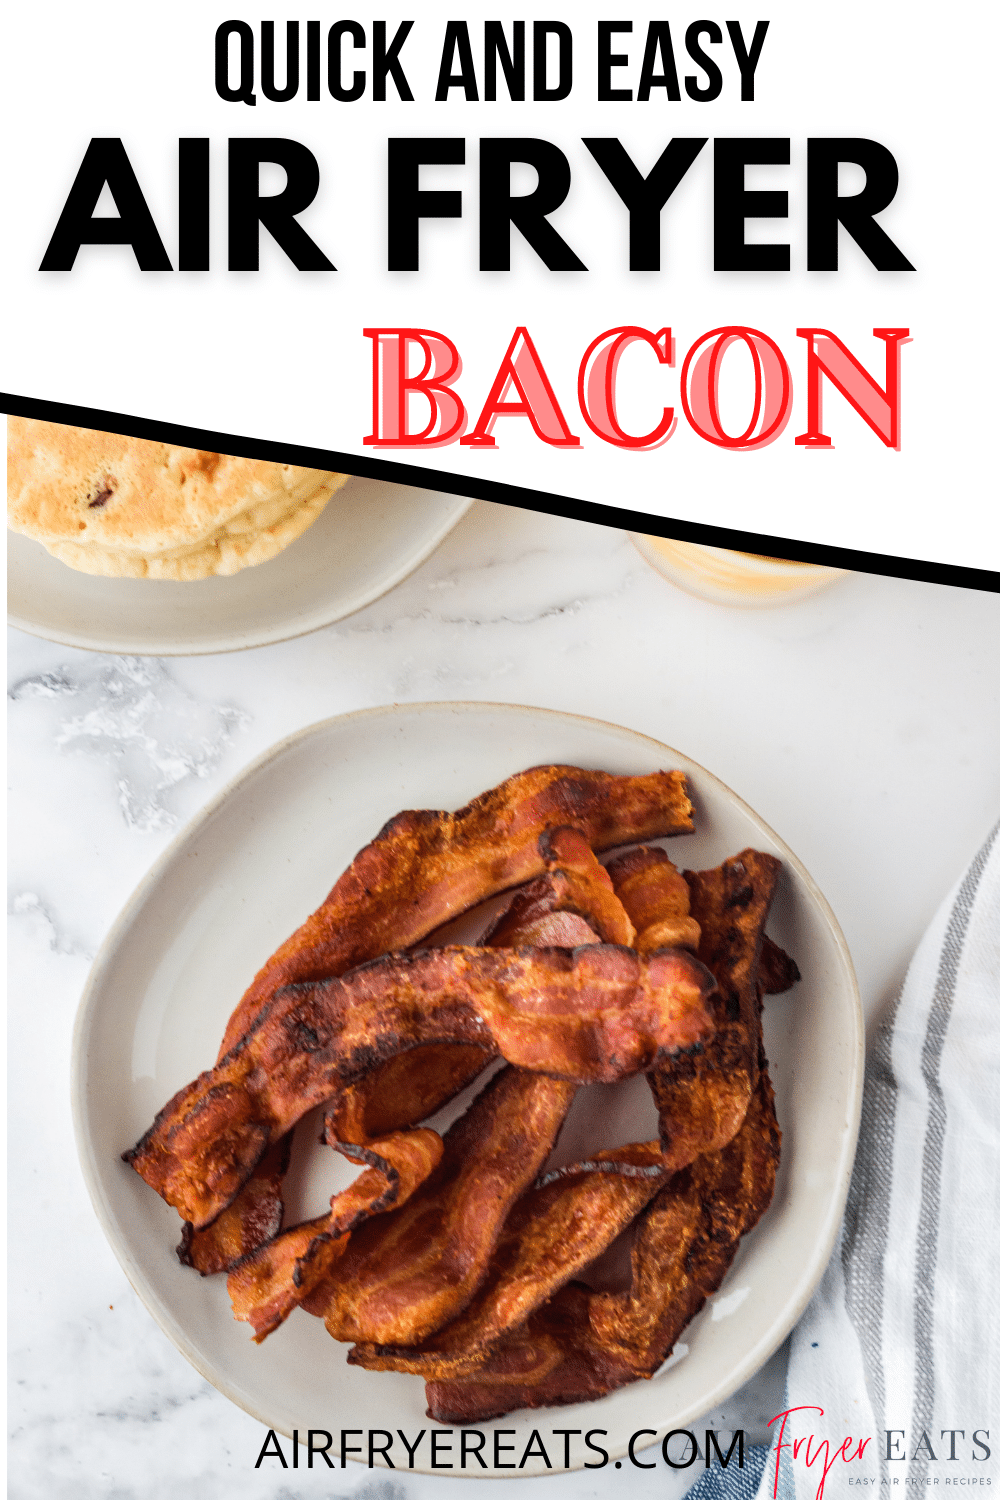 Are you looking for the best and easiest way to cook Ninja Foodi Bacon? You've found it! This air fryer recipe for bacon in the Ninja Foodi is simple, fool-proof, and an amazing timesaver for breakfast or getting bacon ready for other recipes. #ninjafoodi #airfryerbacon via @vegetarianmamma